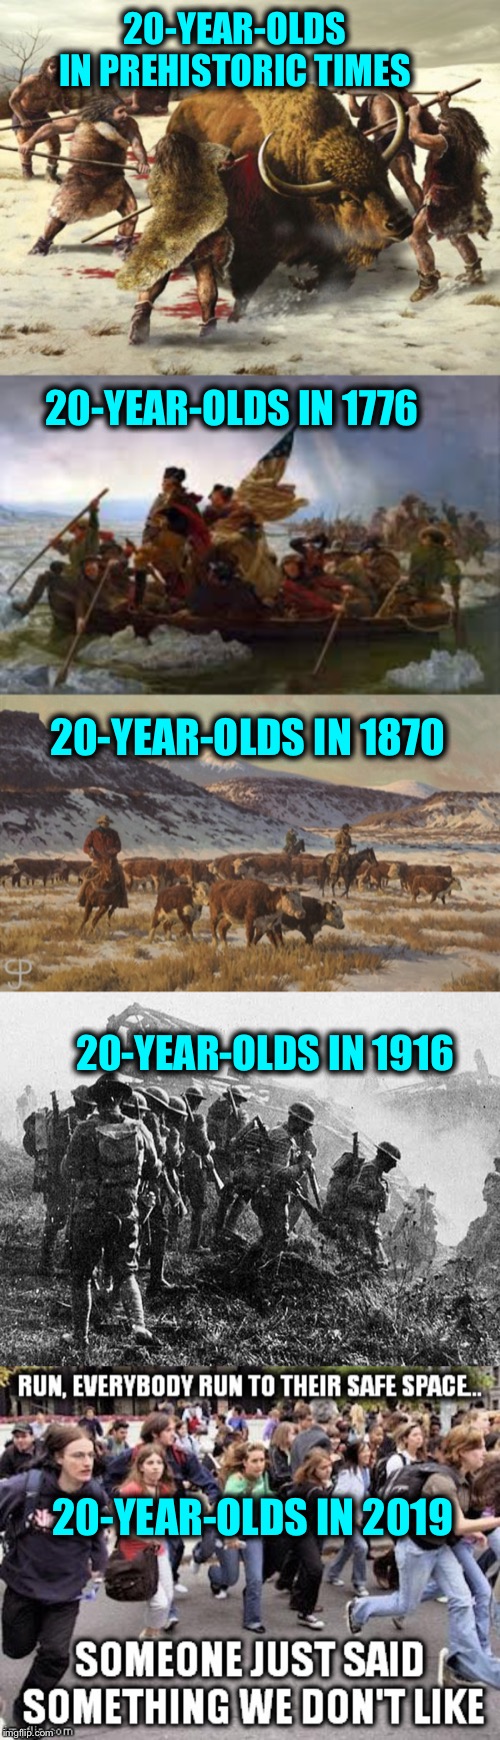 20-YEAR-OLDS IN PREHISTORIC TIMES; 20-YEAR-OLDS IN 1776; 20-YEAR-OLDS IN 1870; 20-YEAR-OLDS IN 1916; 20-YEAR-OLDS IN 2019 | image tagged in snowflakes,libtards,liberal logic,stupid liberals,democratic party | made w/ Imgflip meme maker